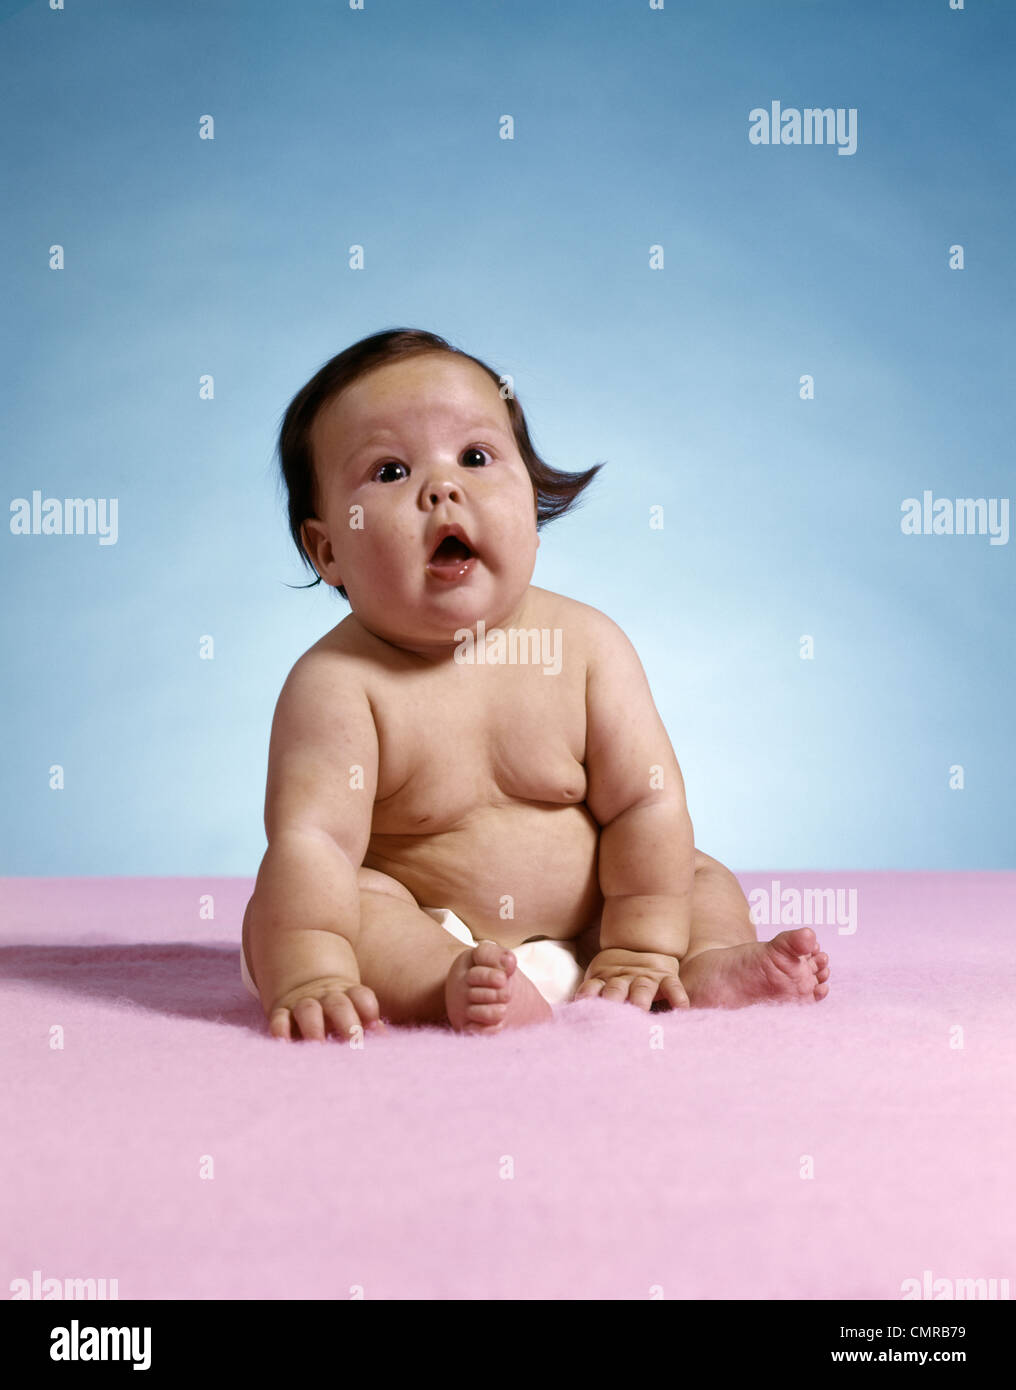 1970s CHUBBY FAT PLUMP BABY OPEN MOUTH WEARING DIAPER SITTING ON PINK RUG Stock Photo